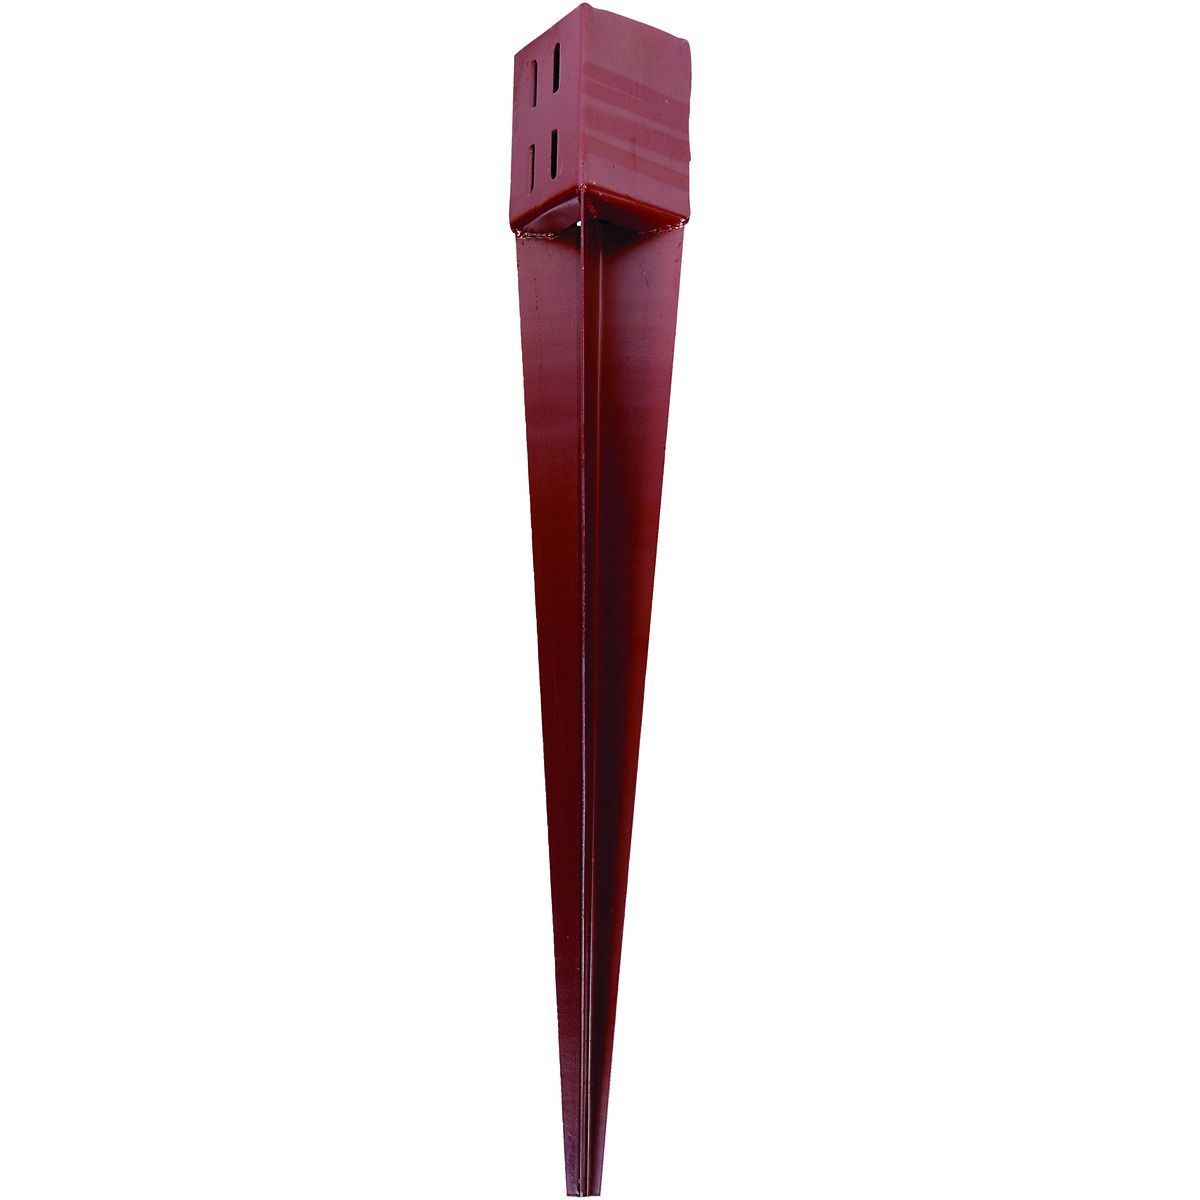 Wickes Wedge 750mm Support Spike for Fence Posts - 100 x 100mm